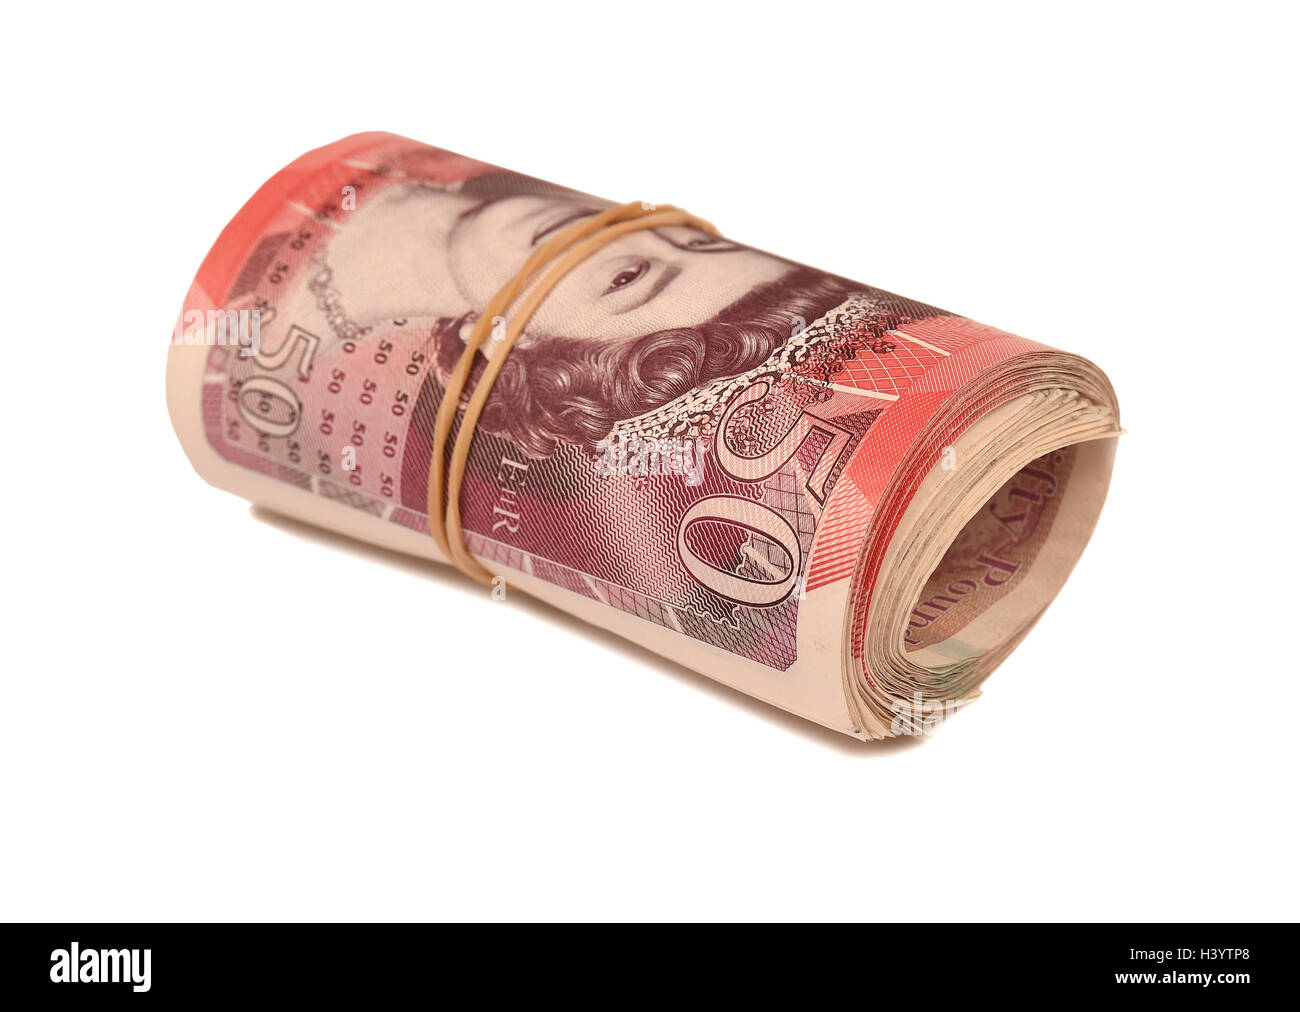 Money, fifty pound notes, banknotes, banknote, cash, currency, sterling, “British money” “British bank notes” Stock Photo